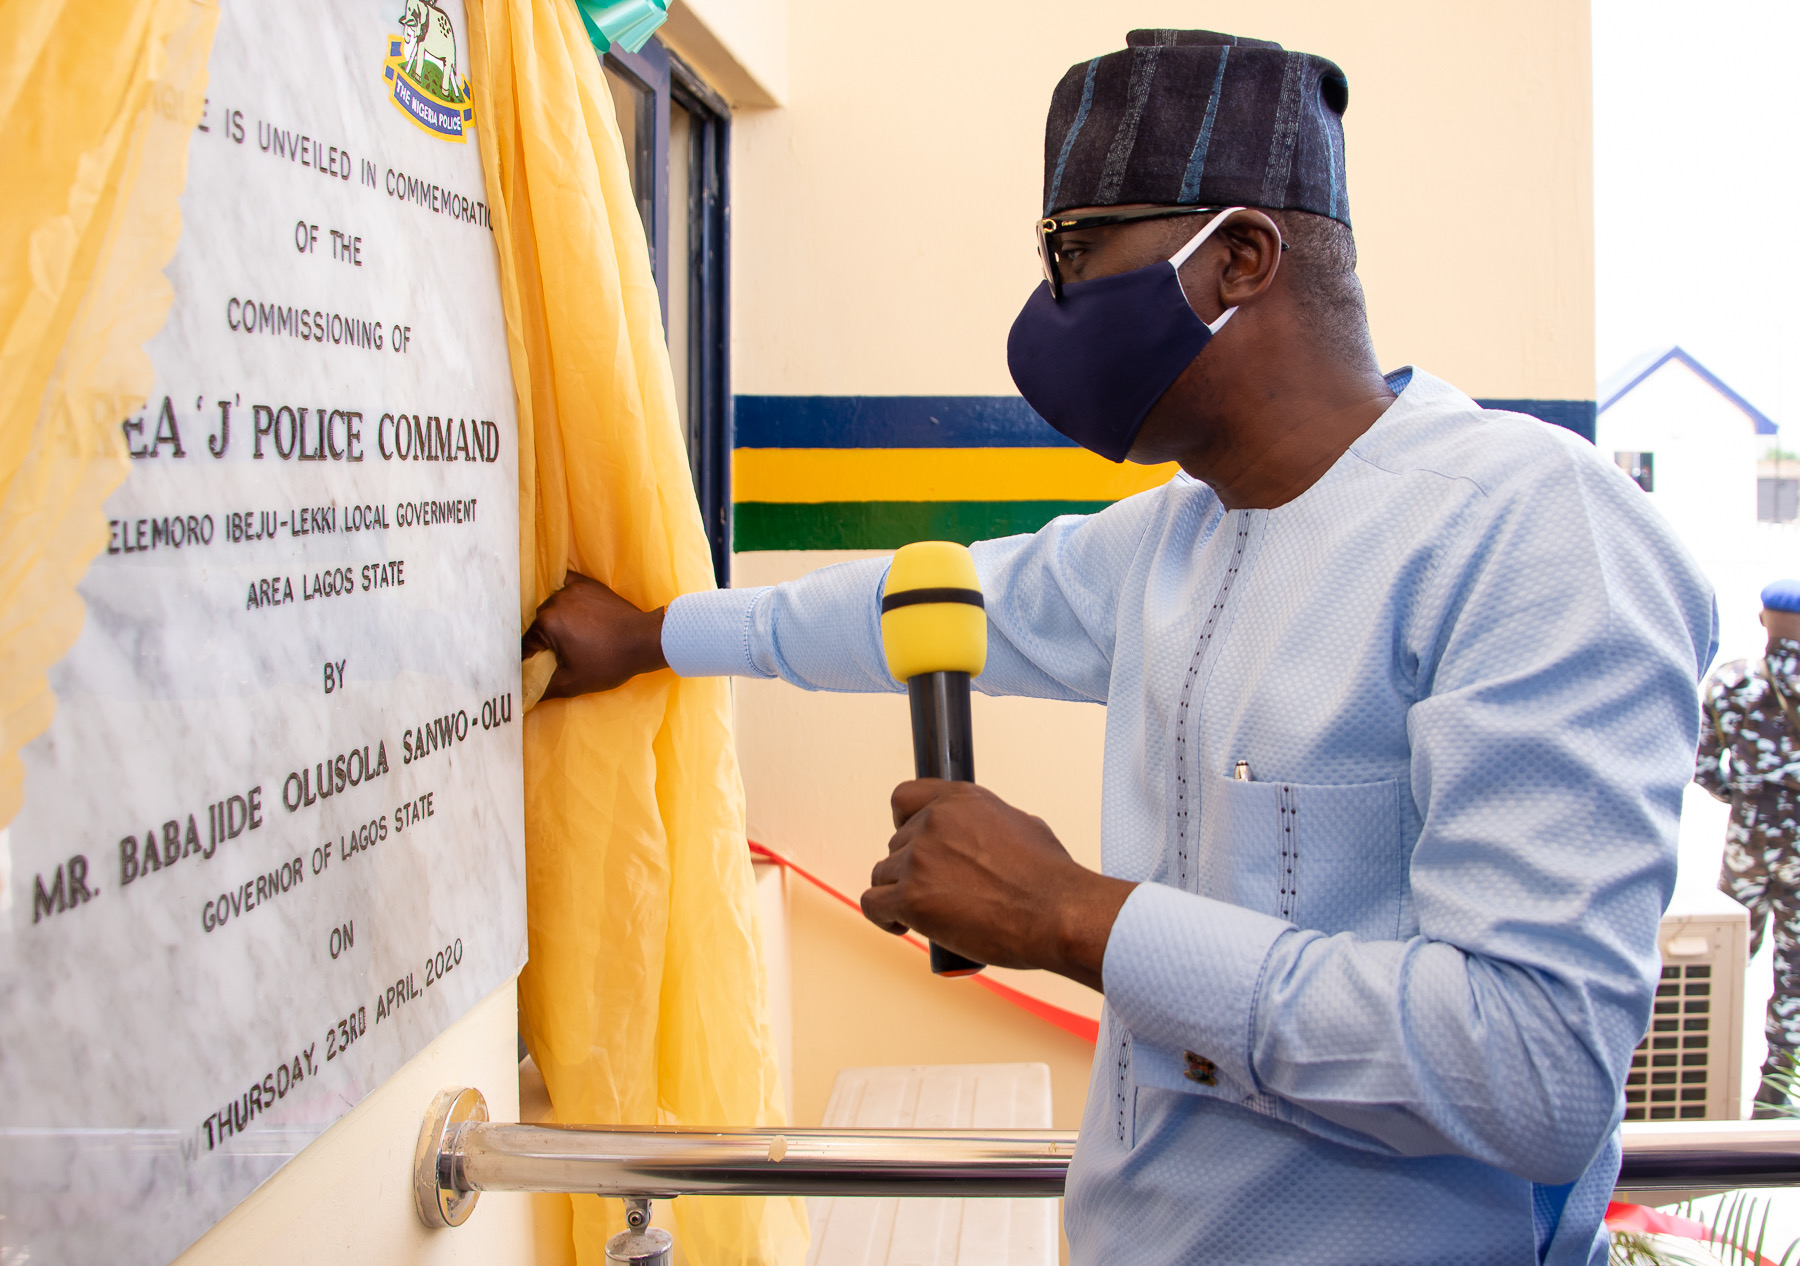 Lagos State Governor, Mr. Babajide Sanwo-Olu, unveiling the plaque at the commissioning of the Area ‘J’ Police Command, Elemoro, Ibeju-Lekki, on Thursday, April 23, 2020.